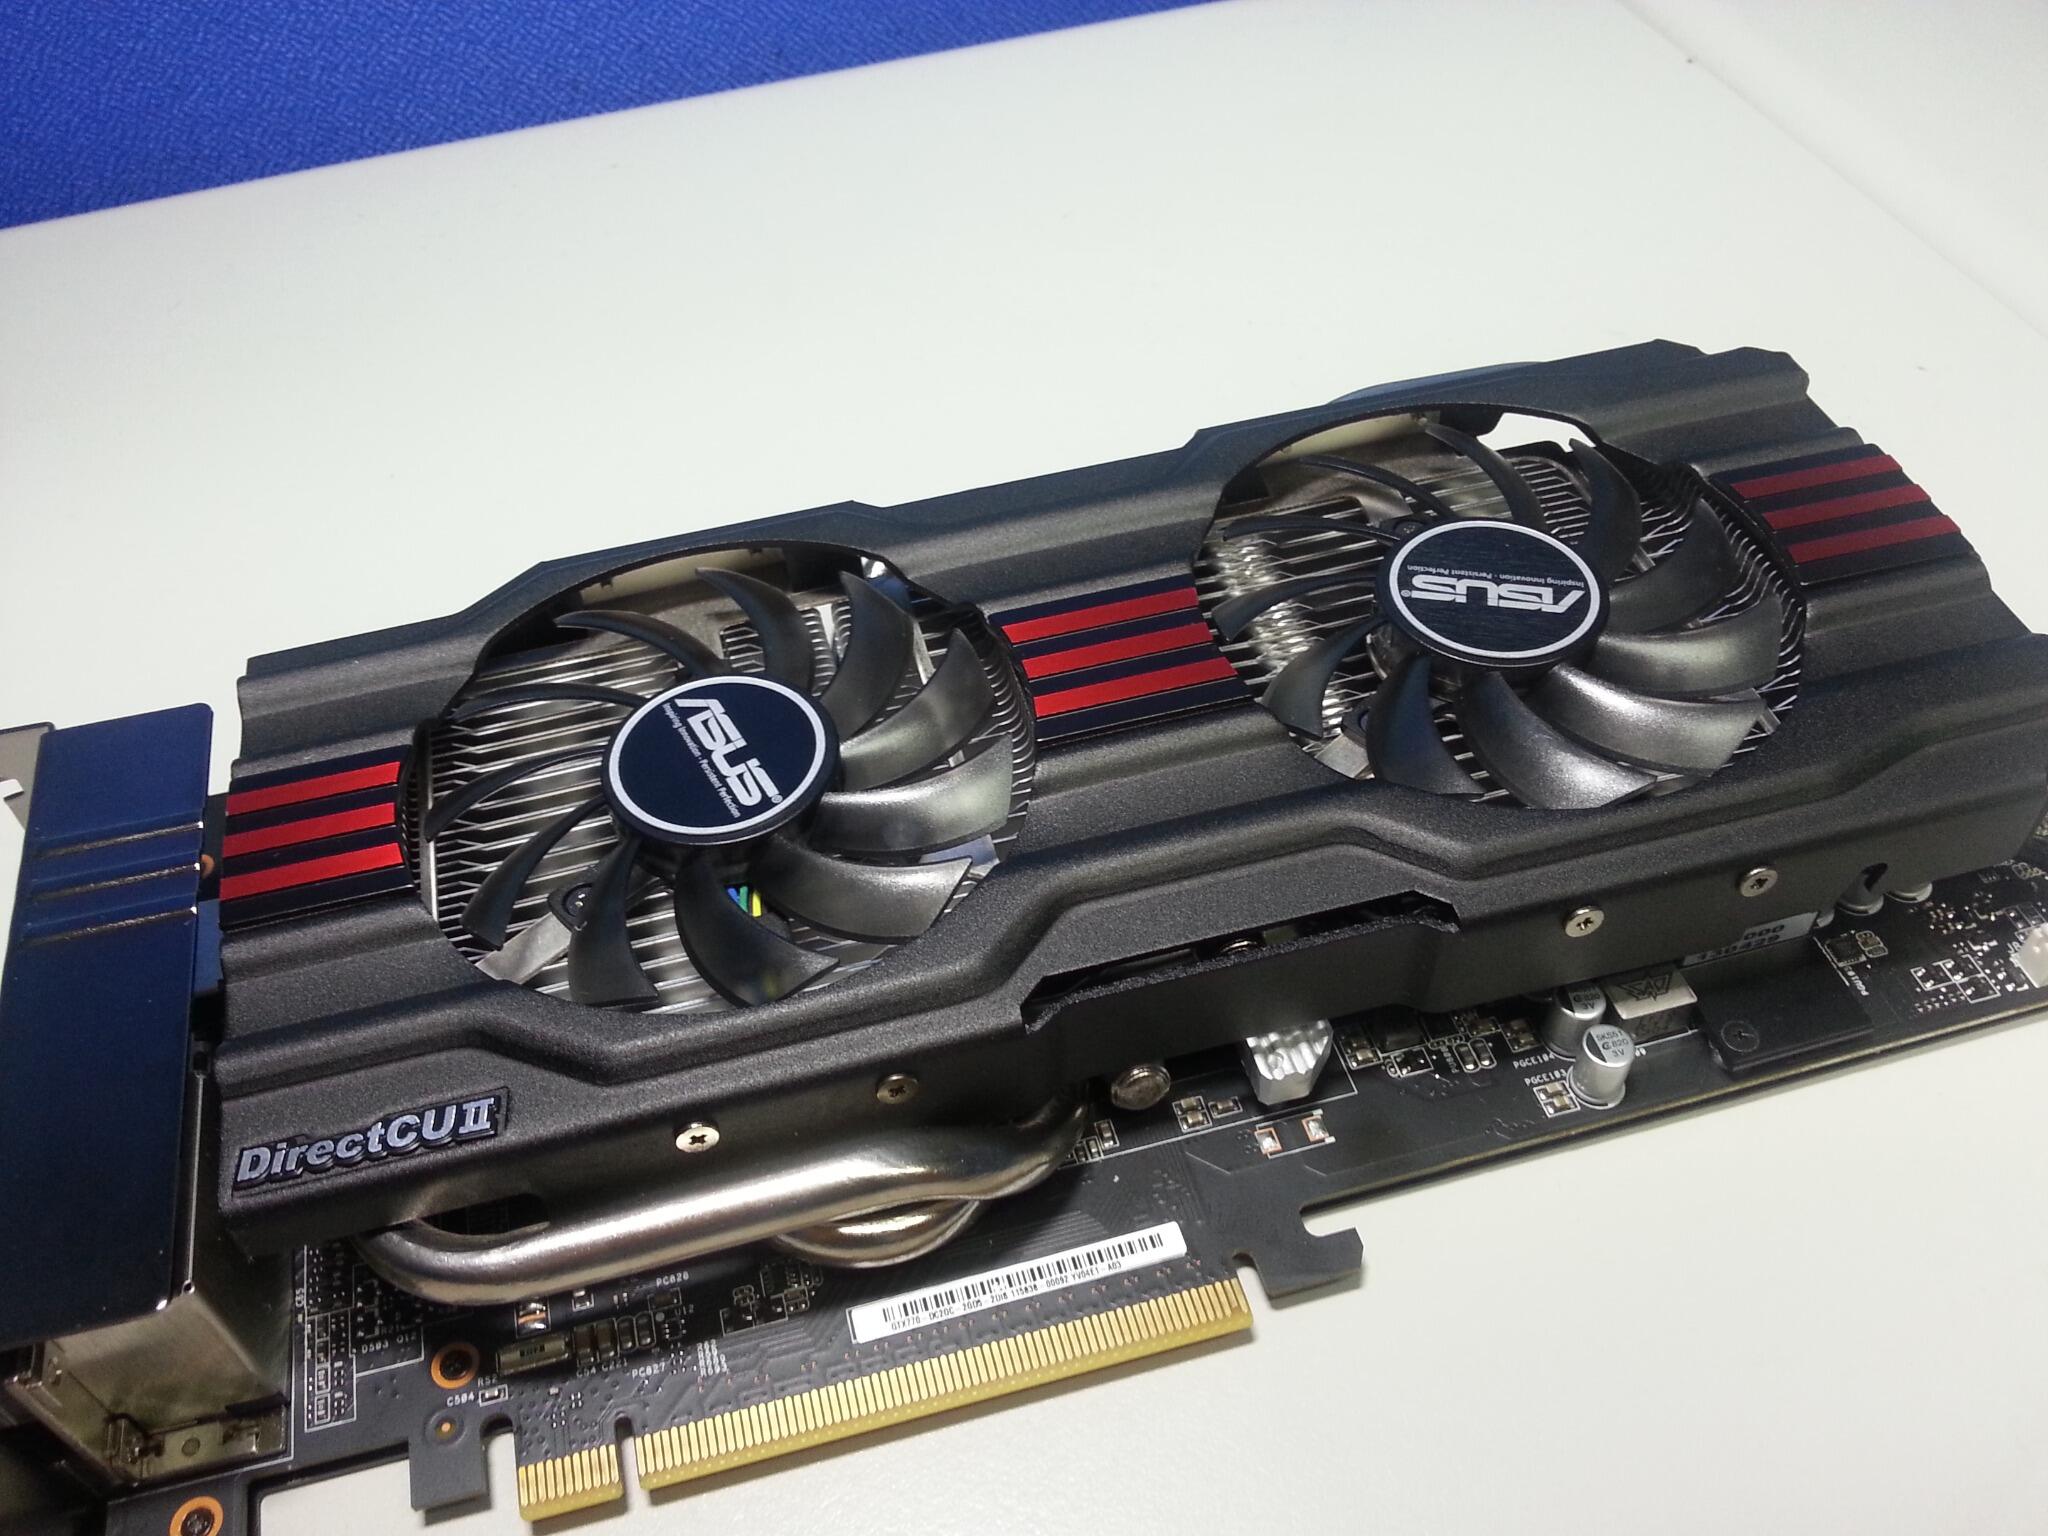 ASUS on Twitter: "Unwrap the ASUS GeForce GTX 770 DirectCU II graphics card  unboxing: http://t.co/skJrfjqPyh http://t.co/WZrw1n2R1O" / Twitter